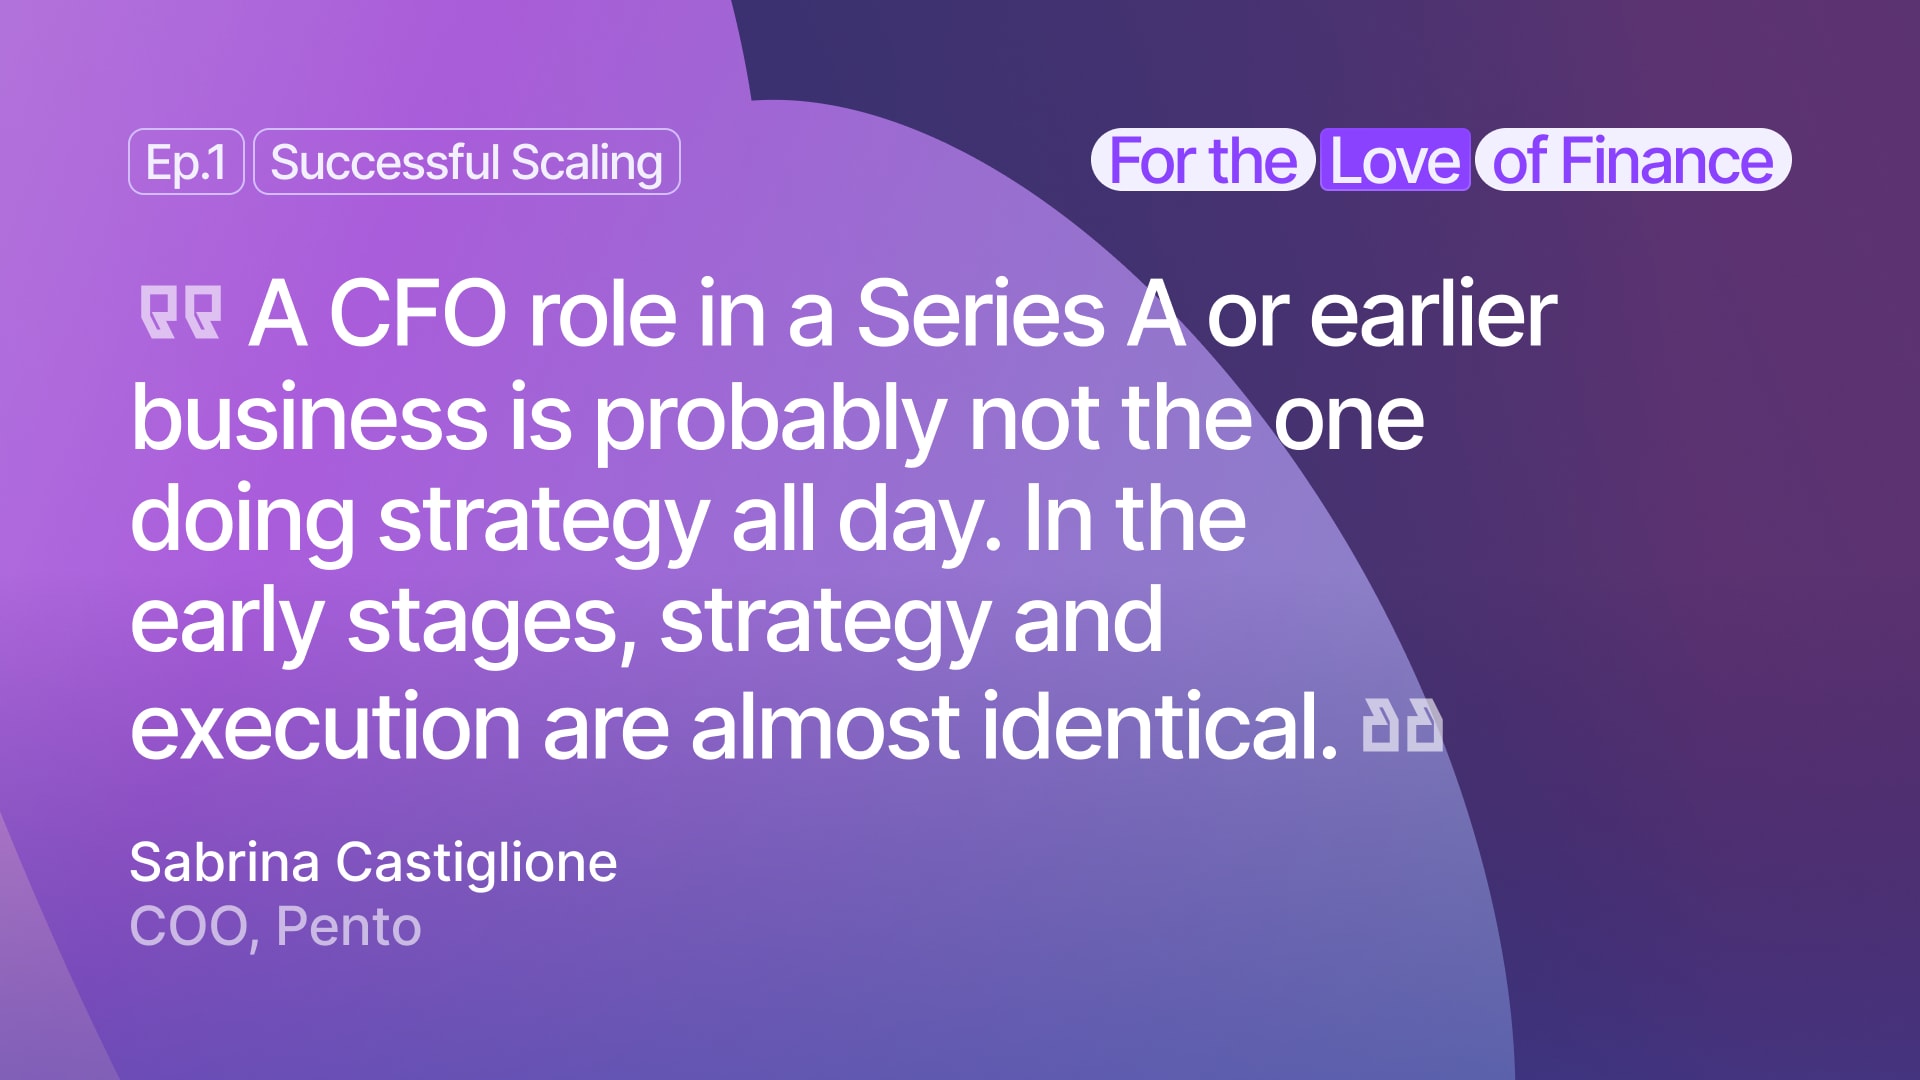 A CFO role in a Series A or earlier business is probably not one that is doing strategy all day. In the early stages, strategy and execution are almost identical.